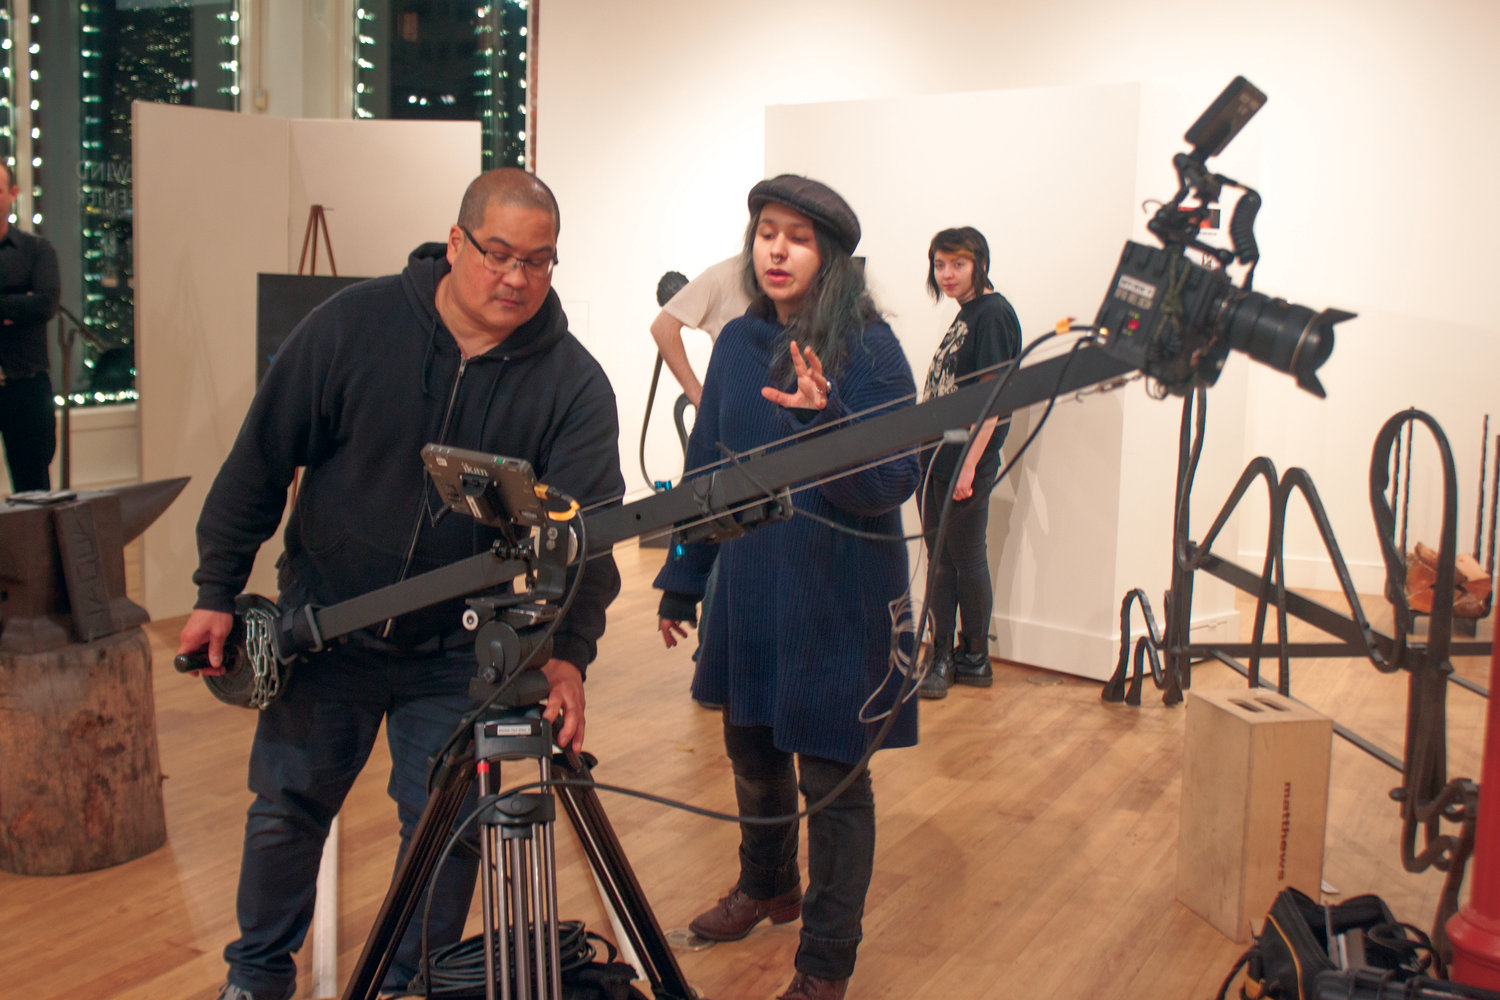 Director of photography Brody Willis (left) receives guidance from “She the Creator” director Juliette Wallace on the positioning of the camera during their Nov. 18 shoot in Northwind Arts Center in Port Townsend.